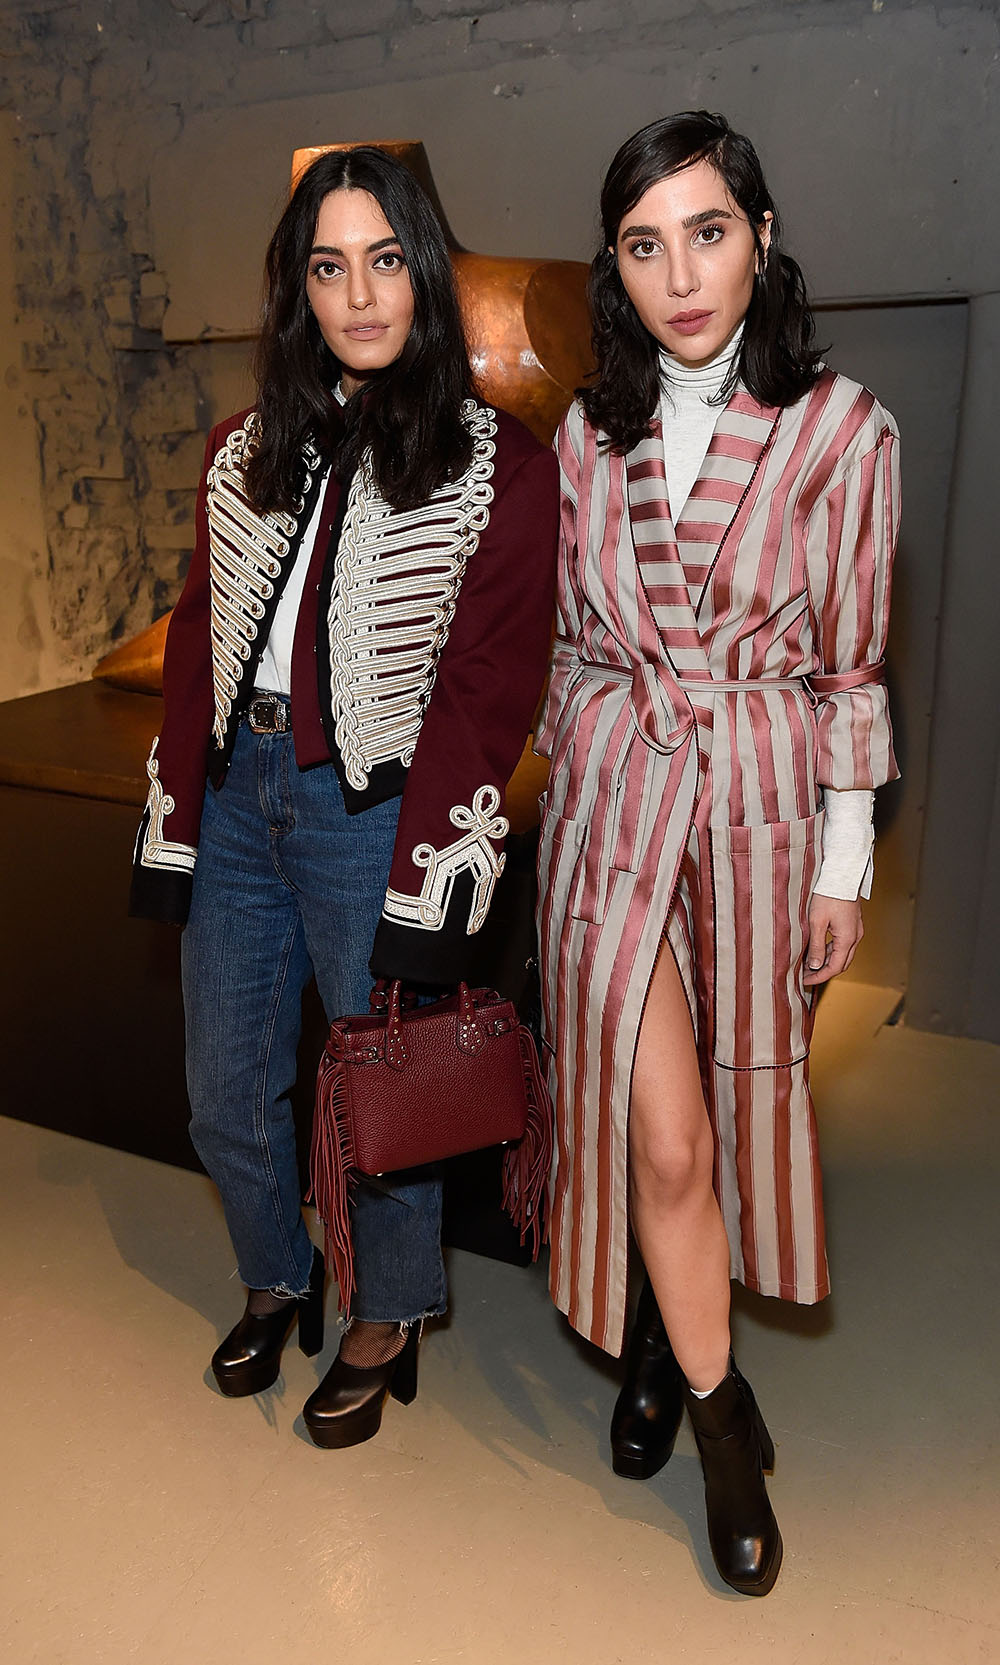 LONDON, ENGLAND - FEBRUARY 20: (L-R) Karen Wazen and Dana Hourani wearing Burberry attends the Burberry February 2017 Show during London Fashion Week February 2017 at Makers House on February 20, 2017 in London, England. (Photo by David M. Benett/Dave Benett/Getty Images for Burberry)